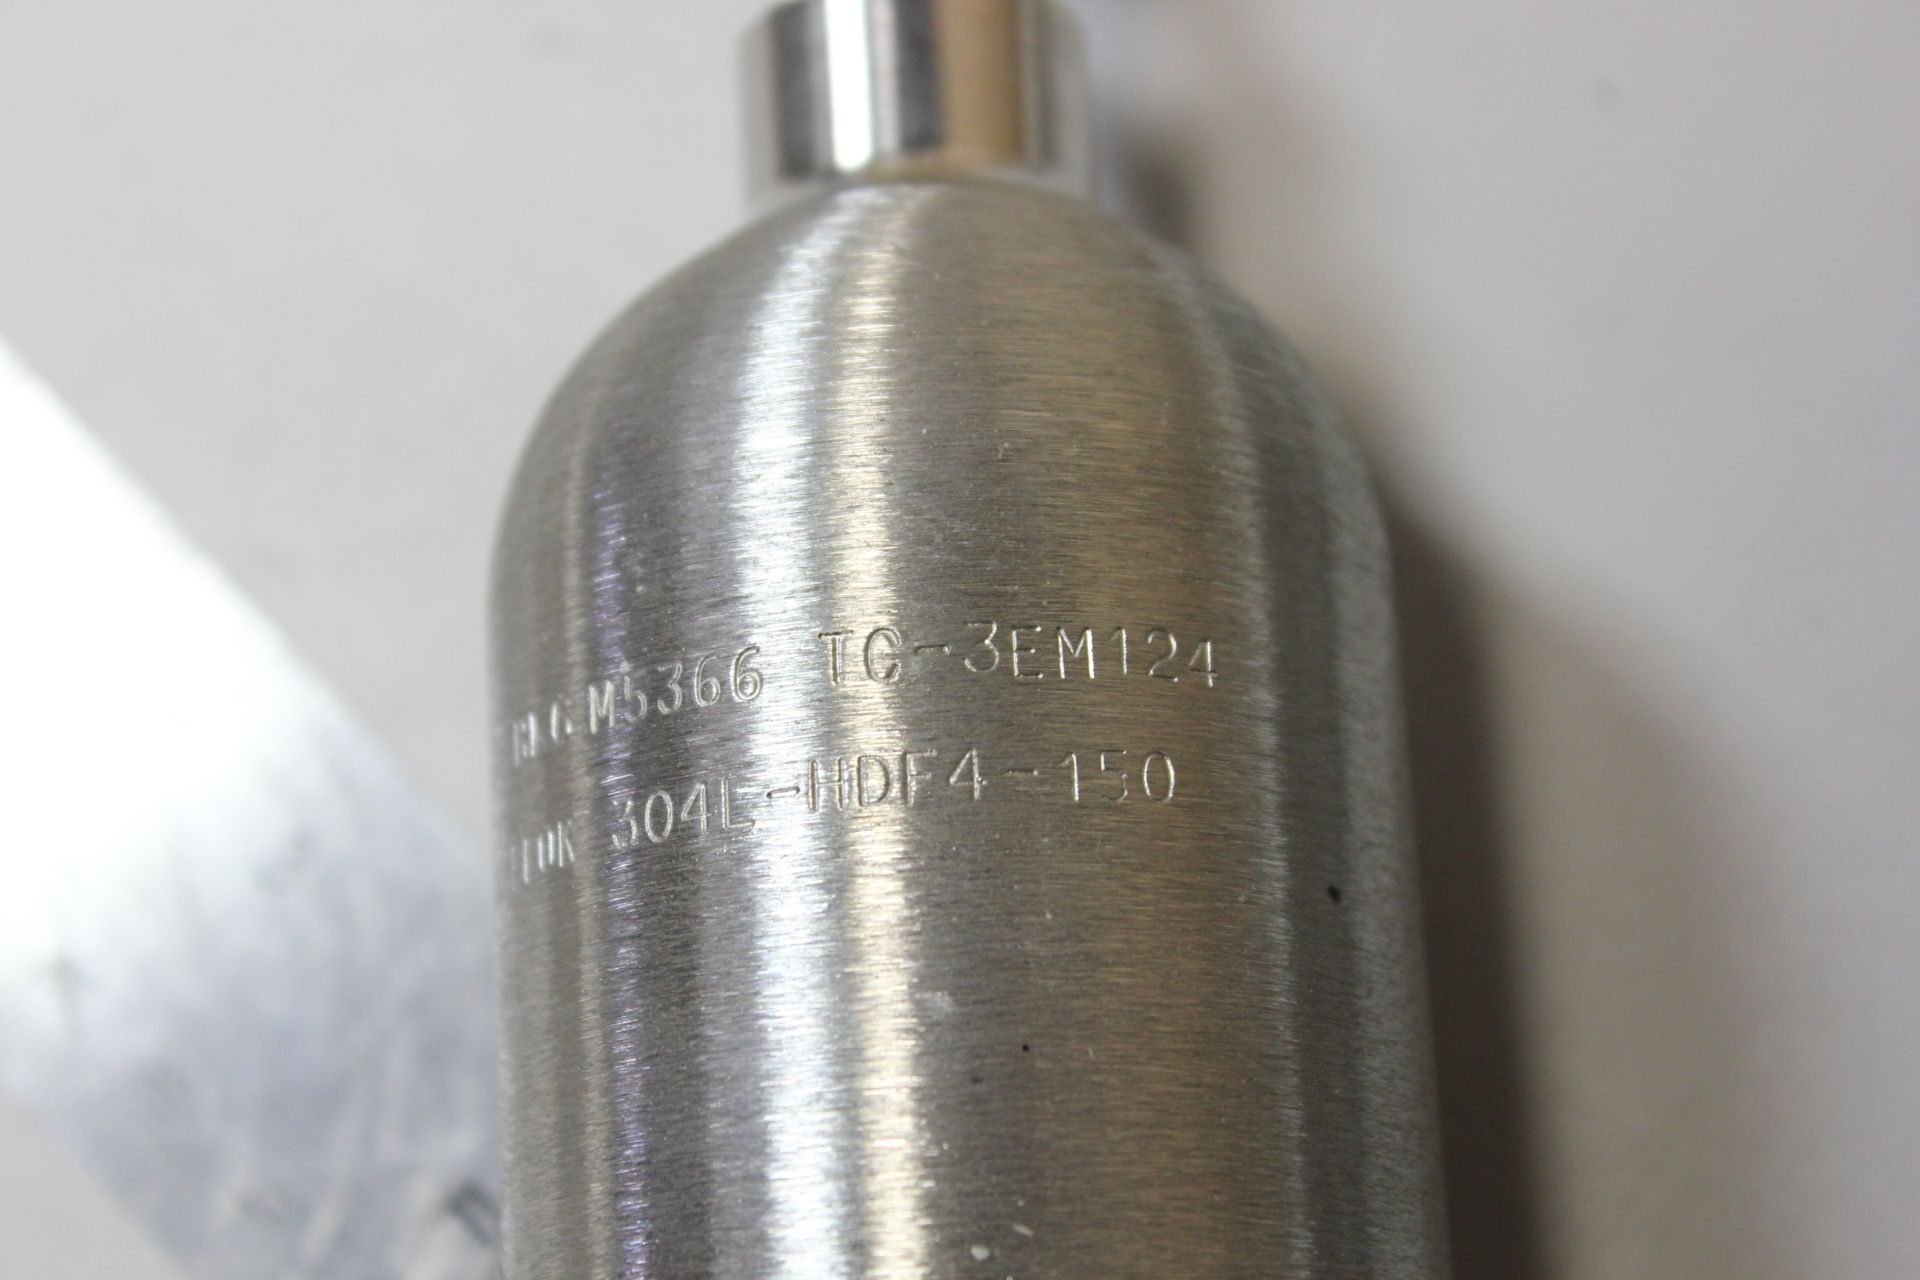 LOT OF SWAGELOK 304L STAINLESS STEEL SAMPLE CYLINDERS - Image 4 of 4